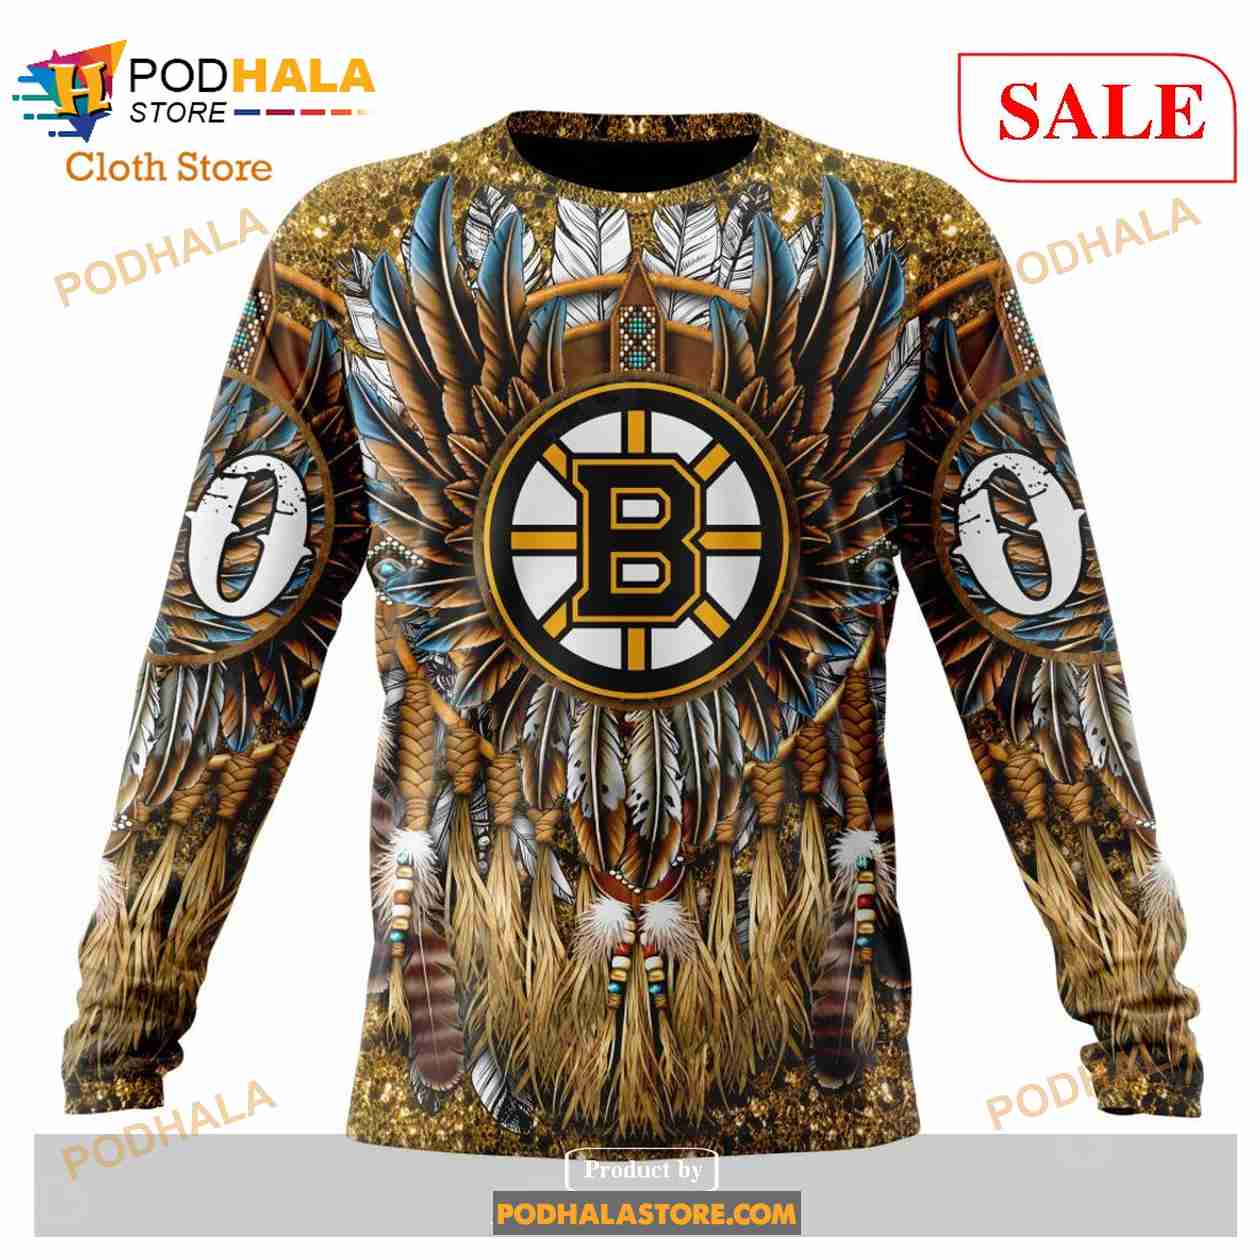 Boston Bruins Personalized Black Ugly Christmas Sweater